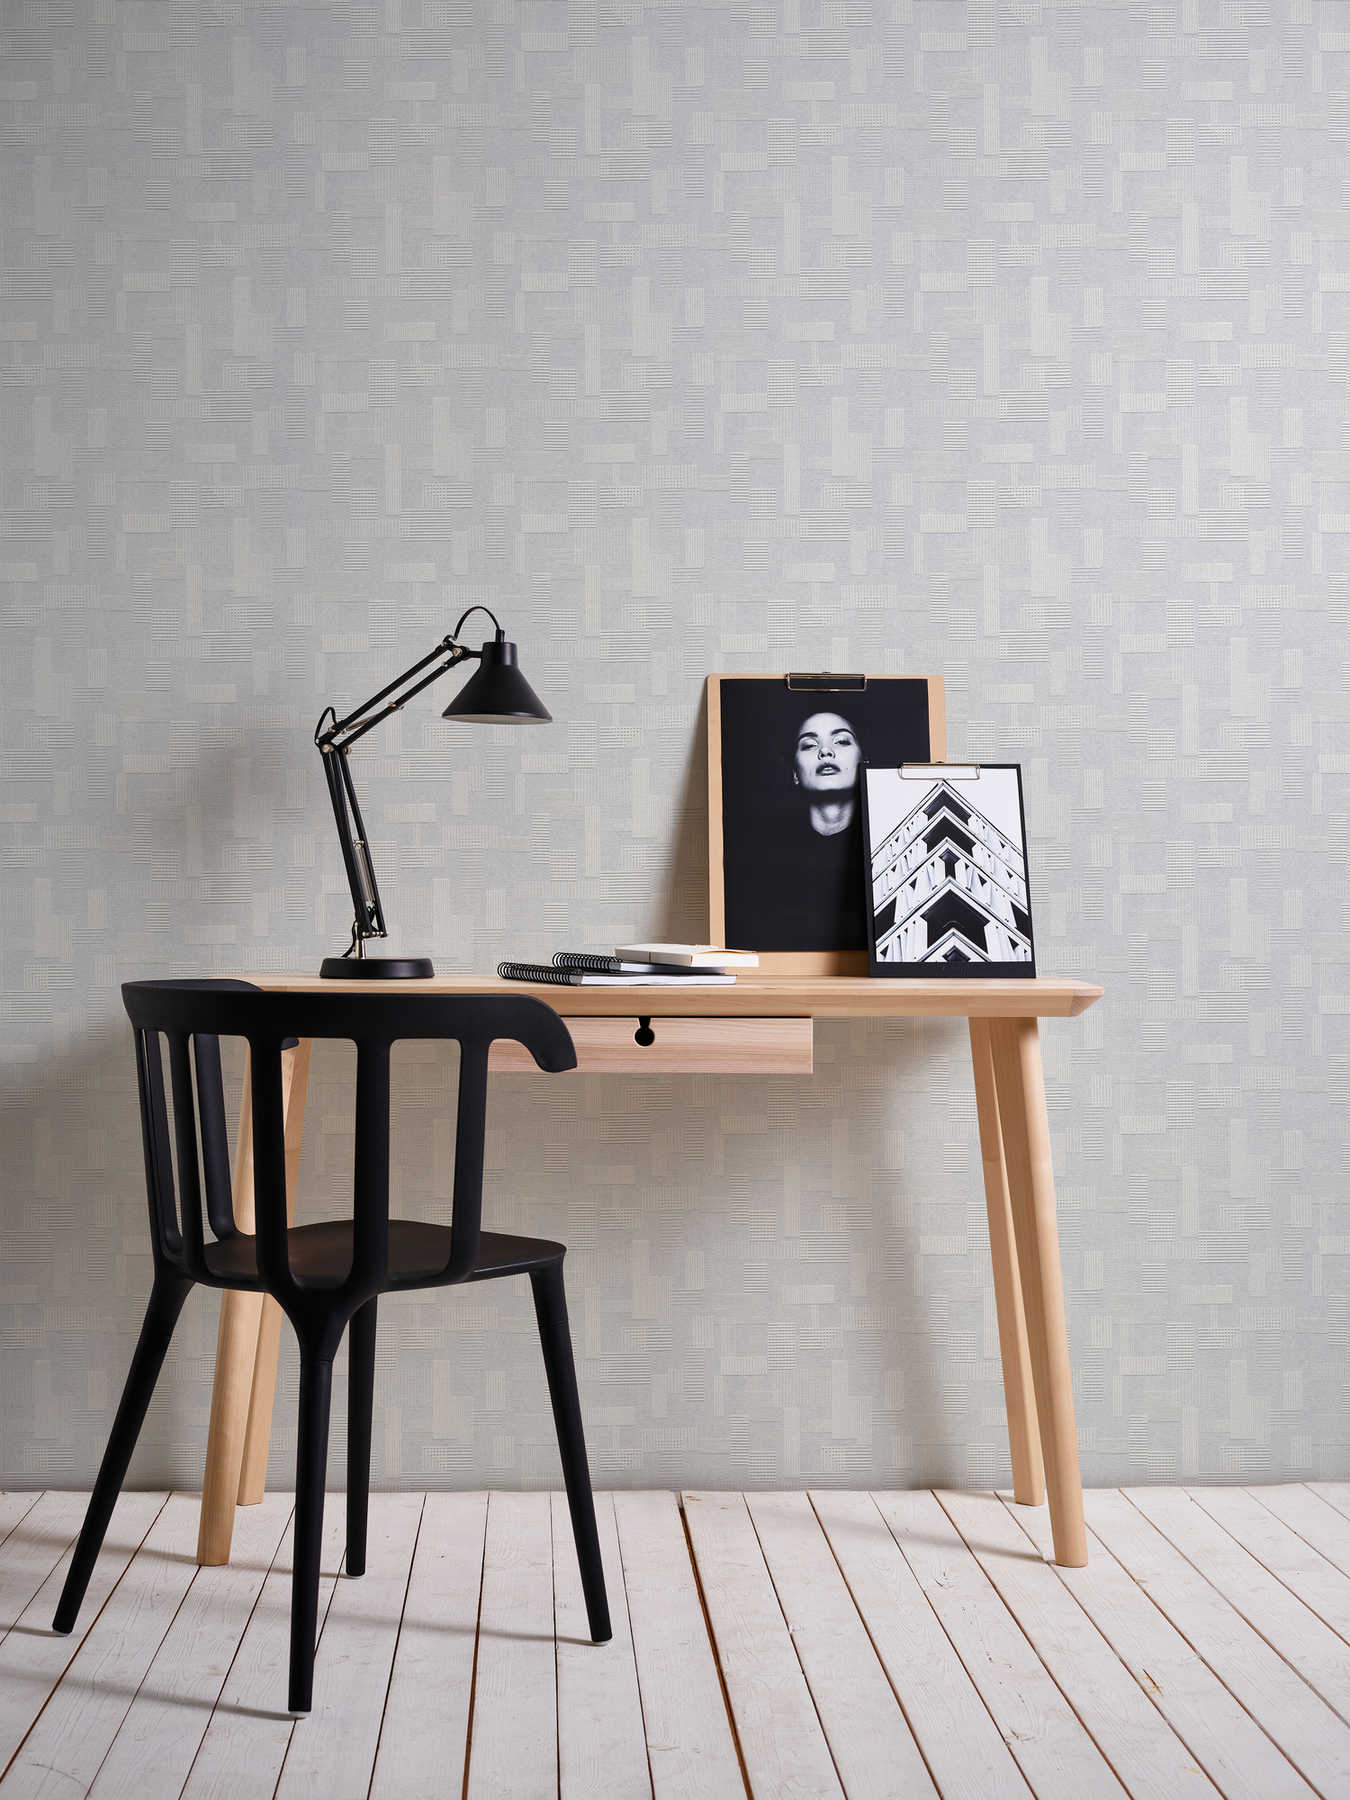             Retro wallpaper with geometric design and 3D effect - white
        